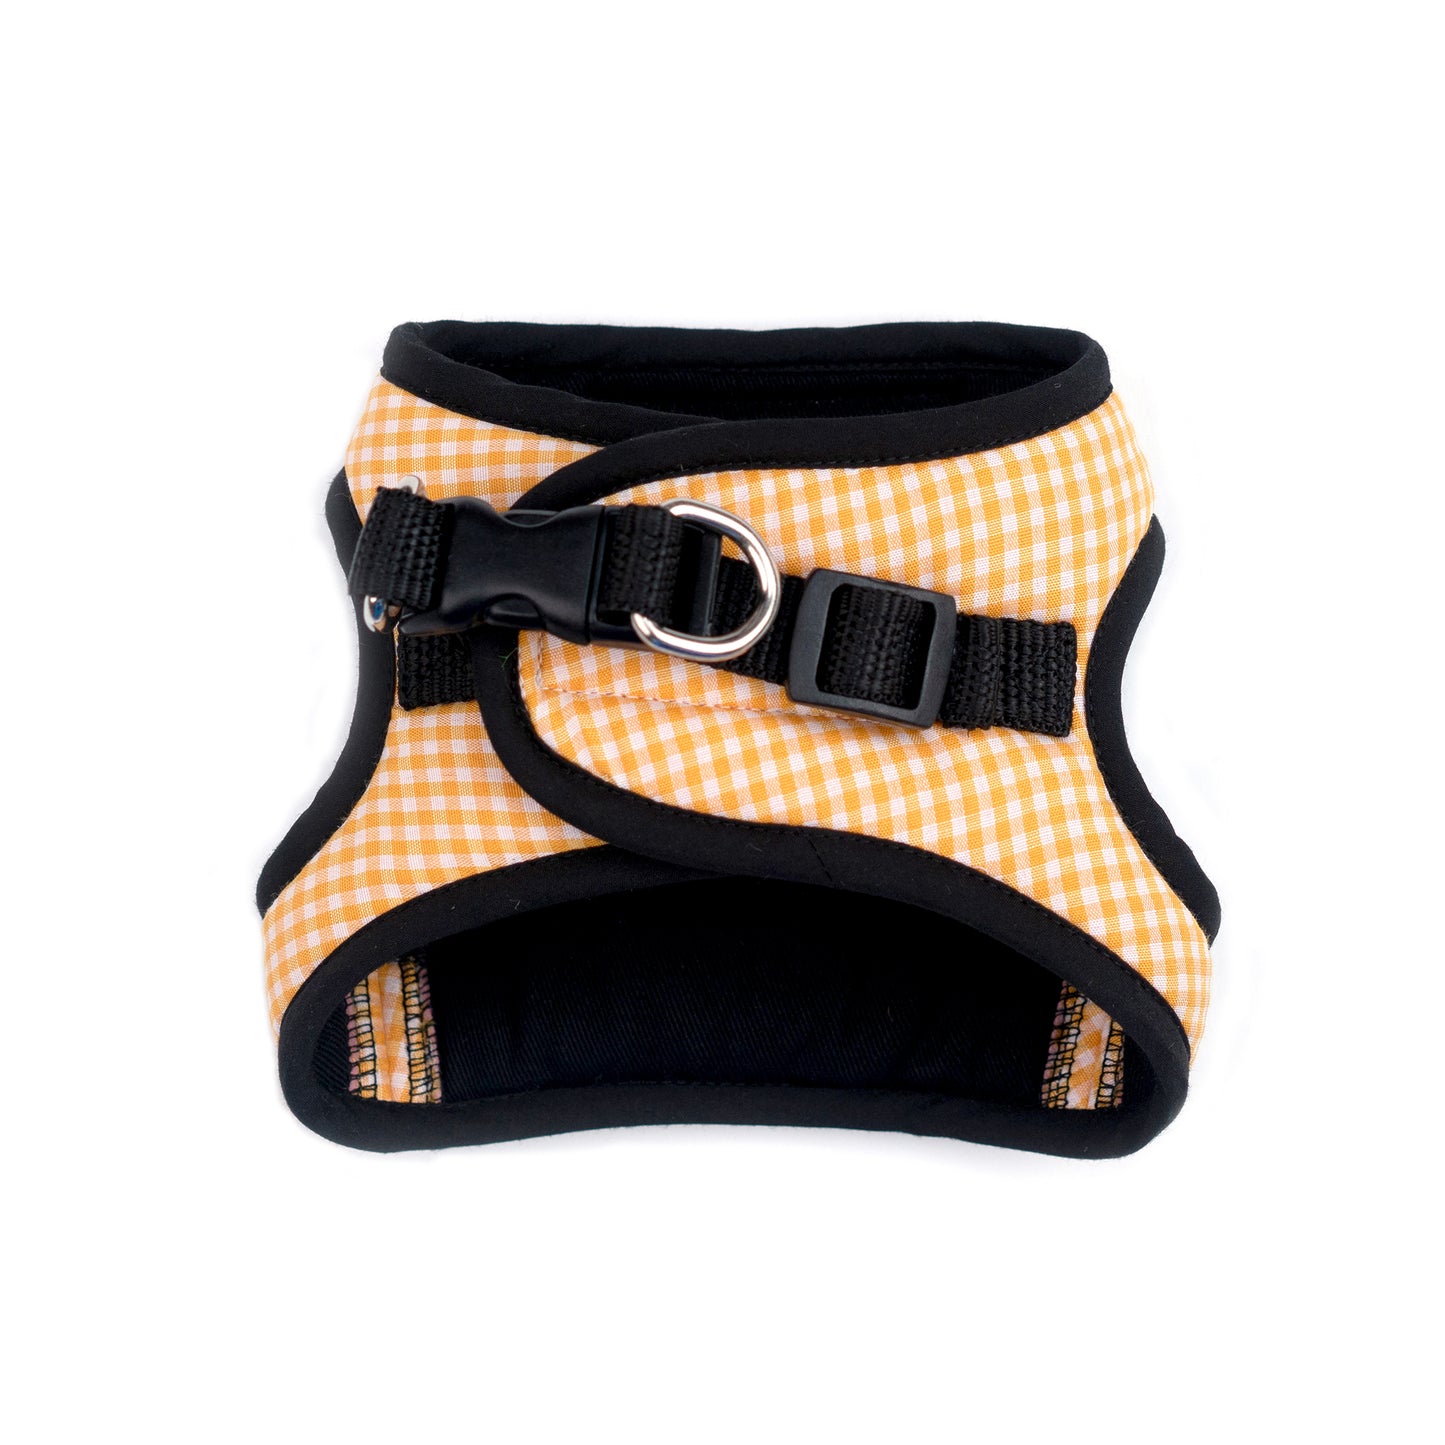 Yellow Gingham Body Suit Harness